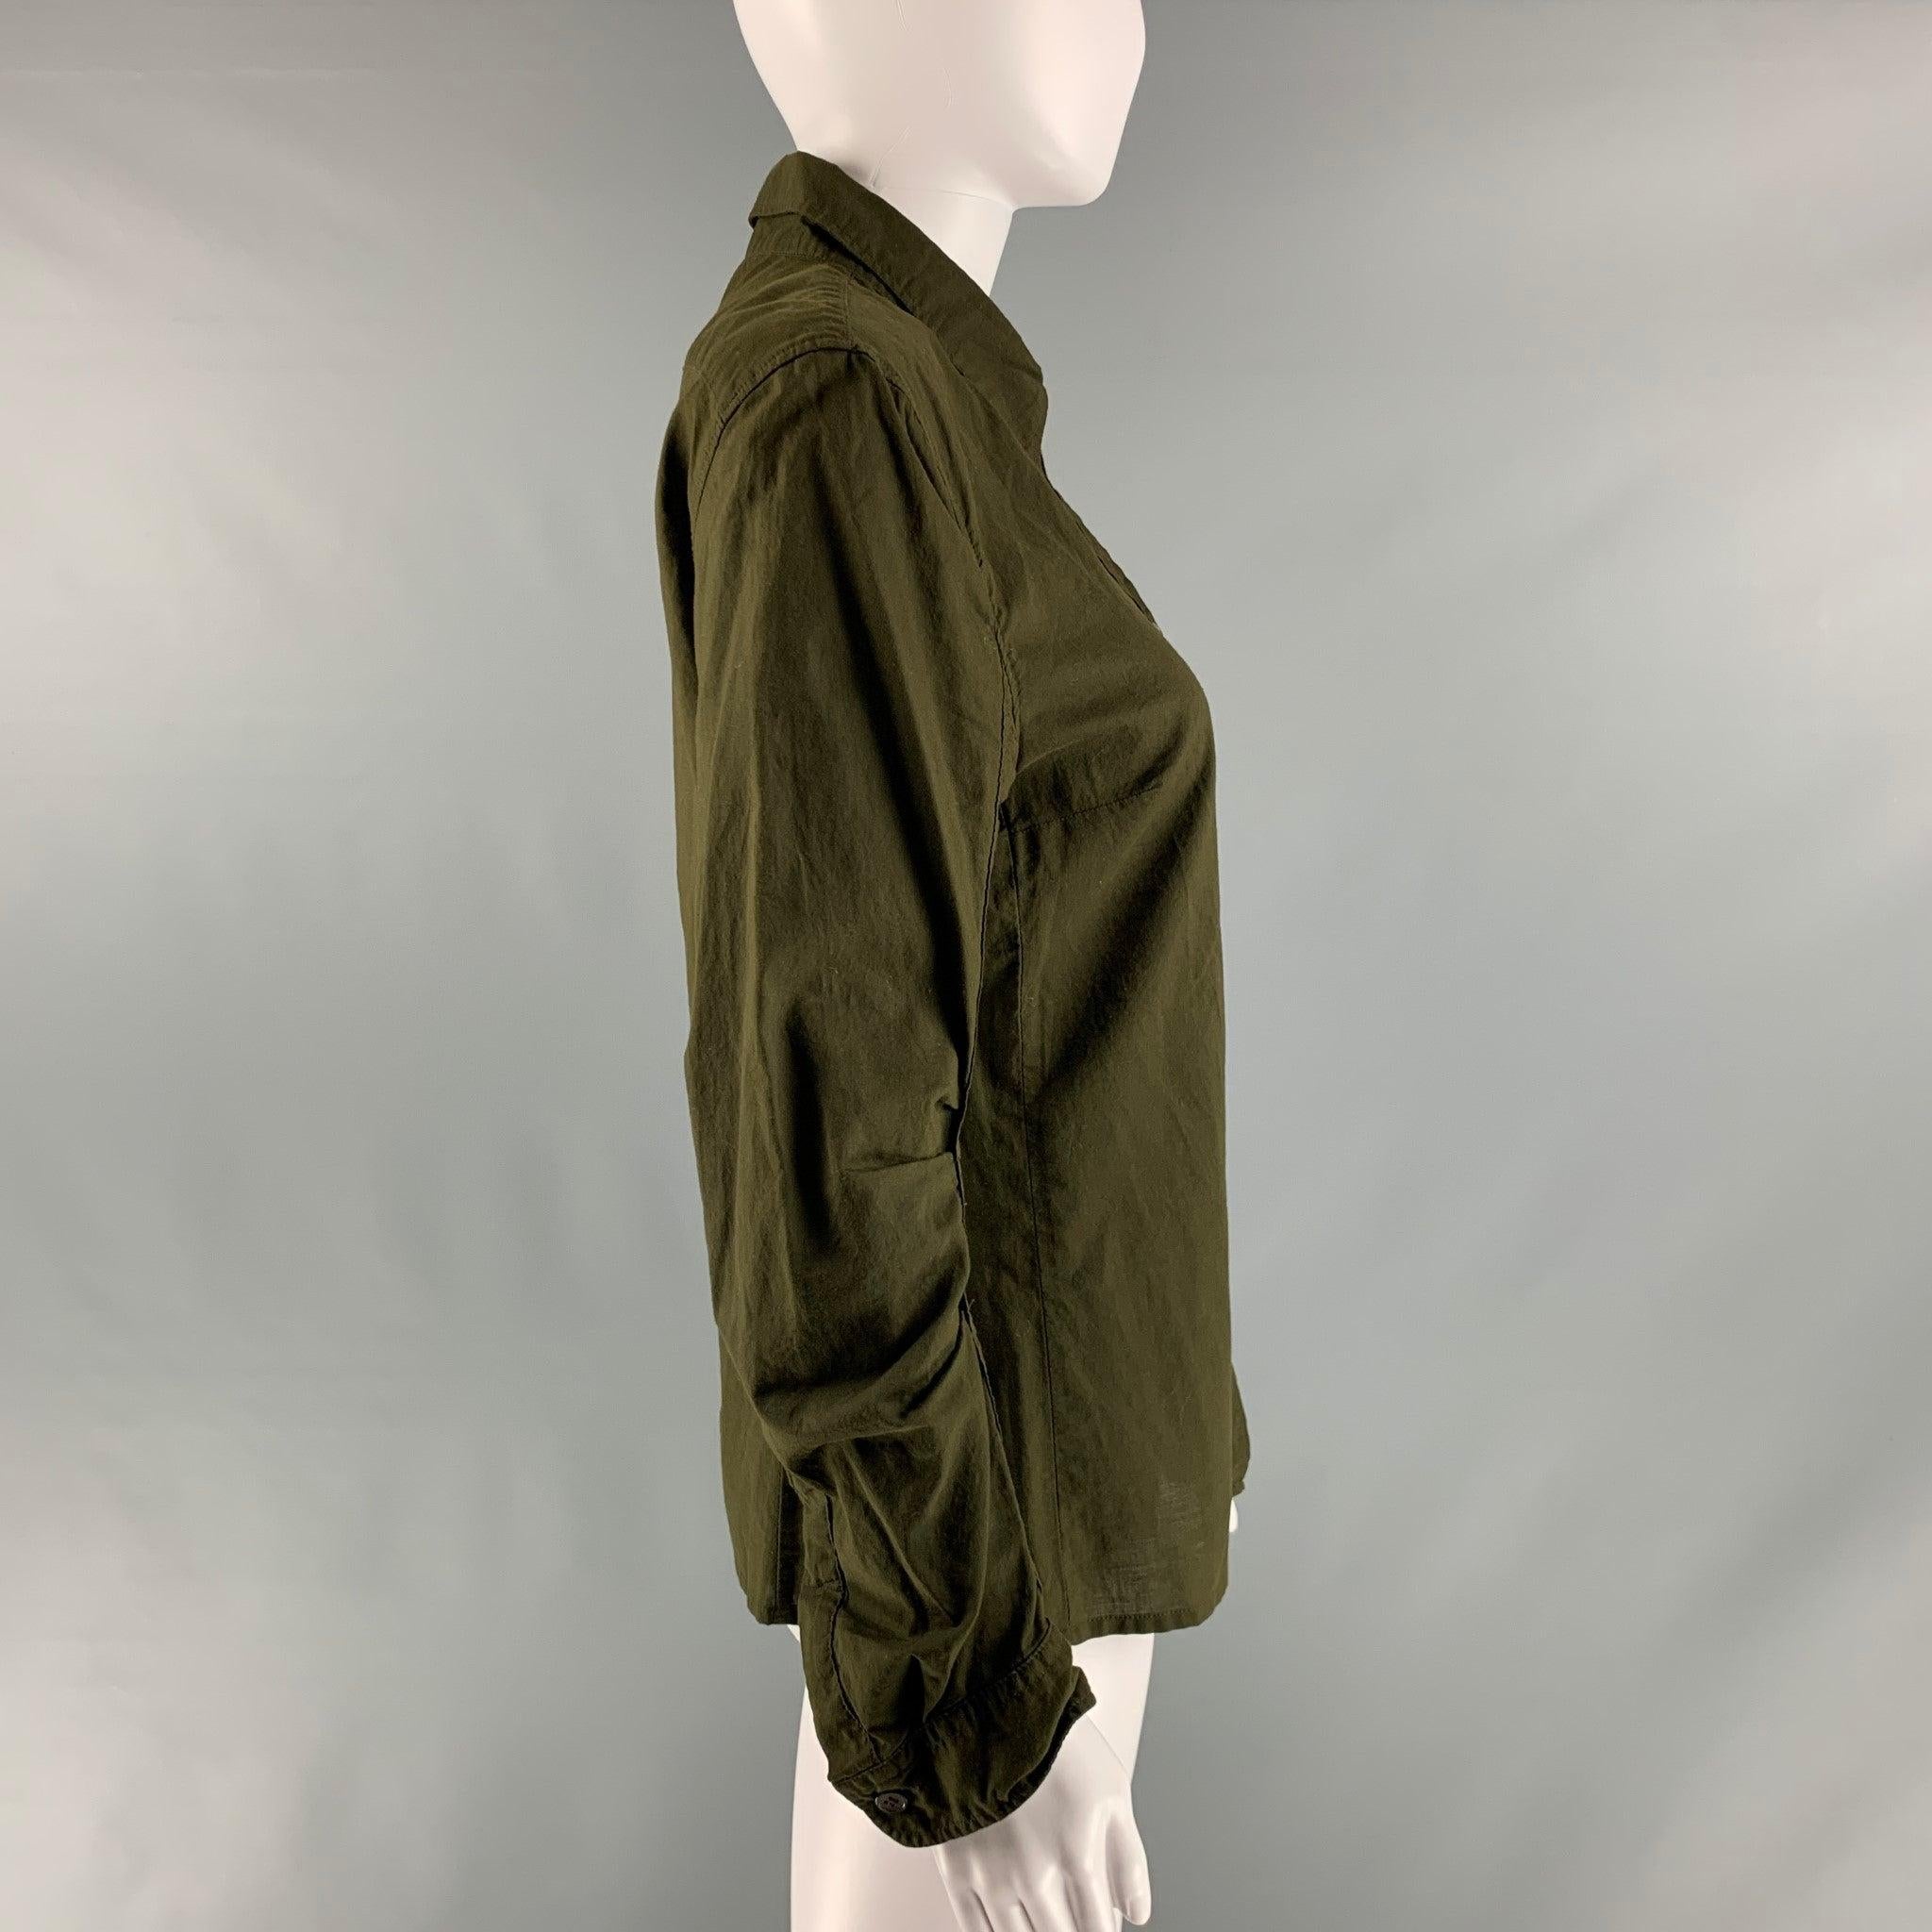 ANN DEMEULEMEESTER long sleeve shirt comes in a green olive cotton woven material featuring a rushed details at sleeves, and a button down closure. Made in Belgium.Excellent Pre-Owned Condition. 

Marked:   38 

Measurements: 
 
Shoulder: 16 inches